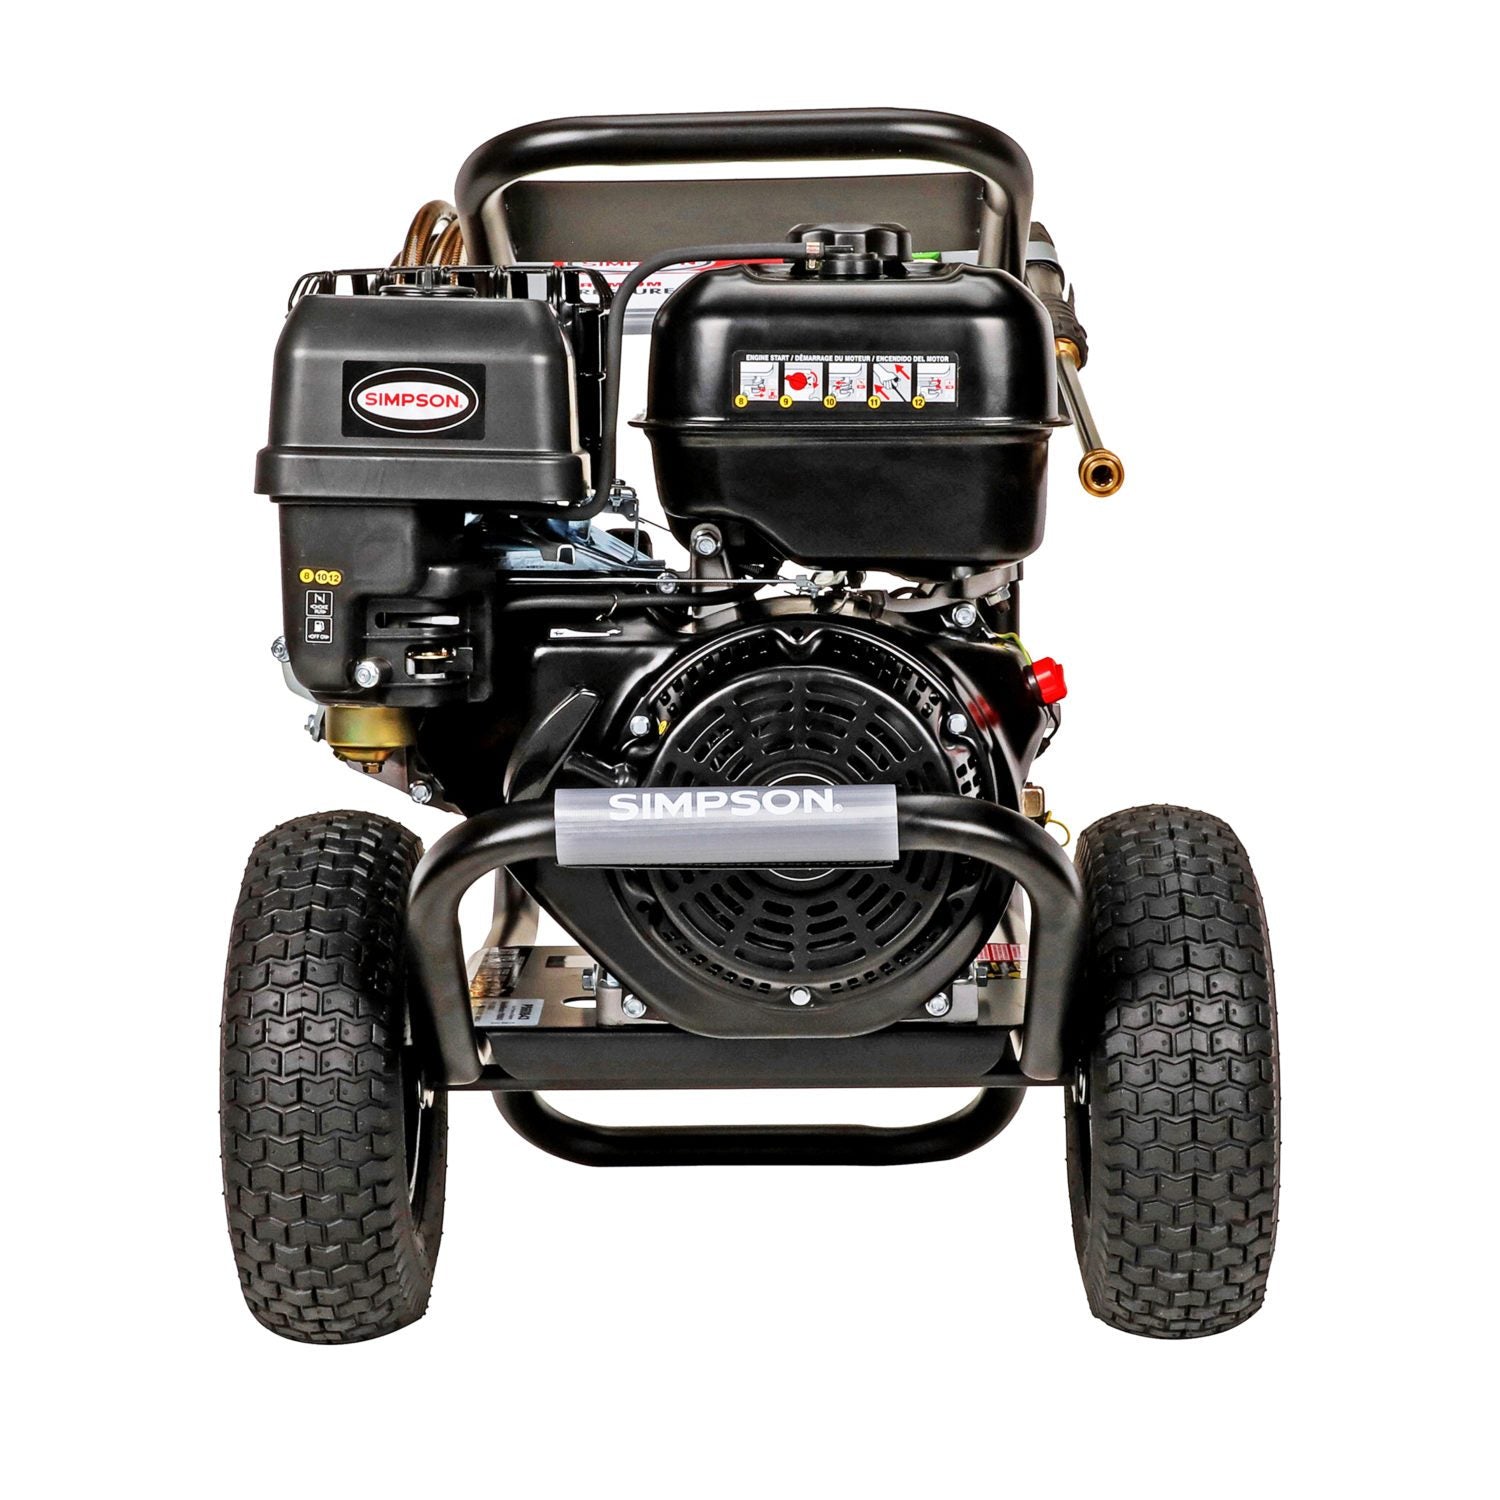 Simpson, Simpson PS60843 PowerShot 4400 PSI 4 GPM Gas Pressure Washer New